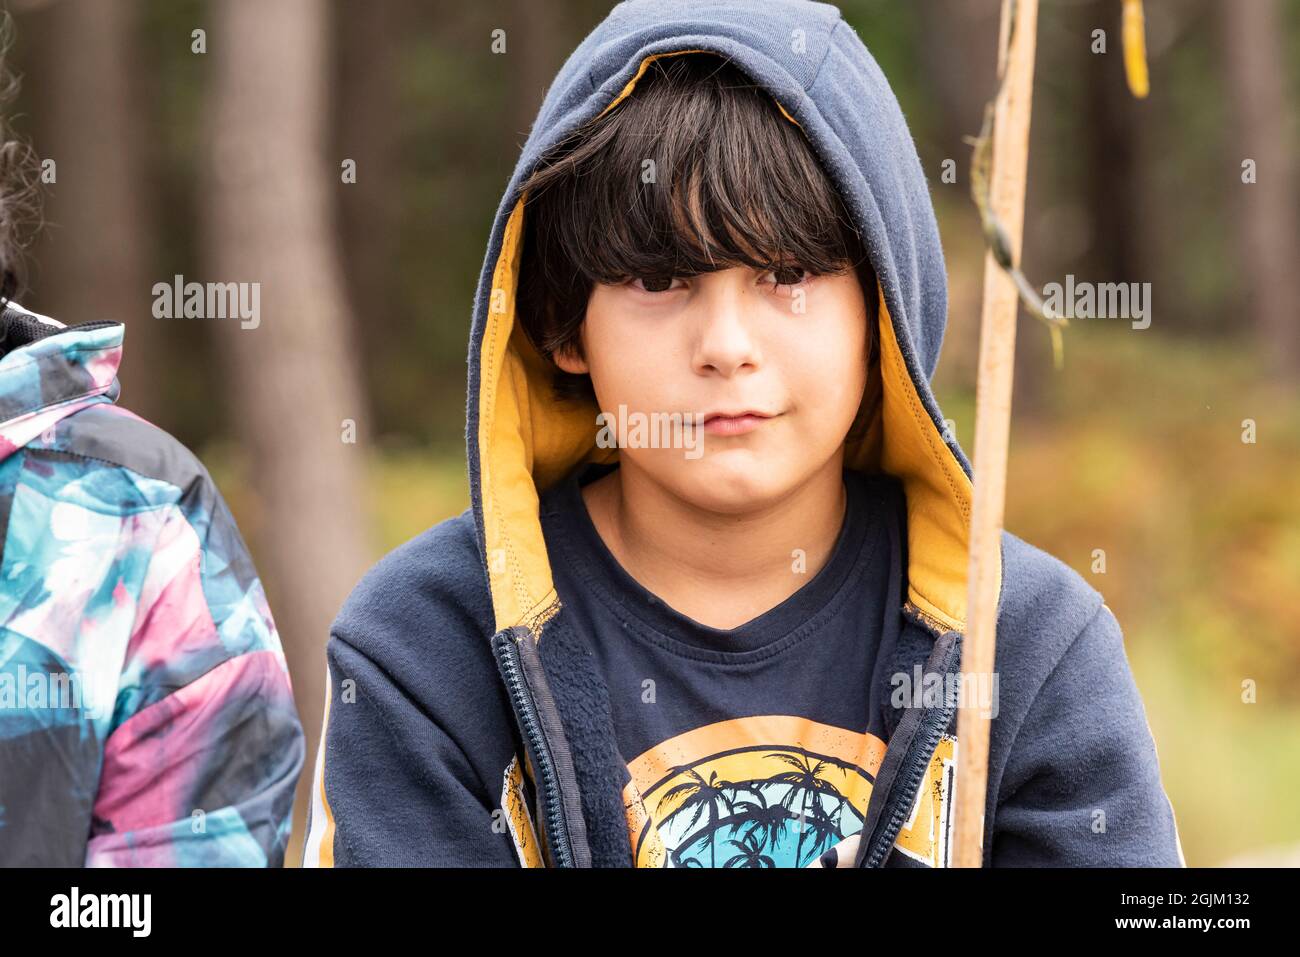 half-length portrait of a white Caucasian boy with brown hair wearing a hooded sweatshirt. Stock Photo